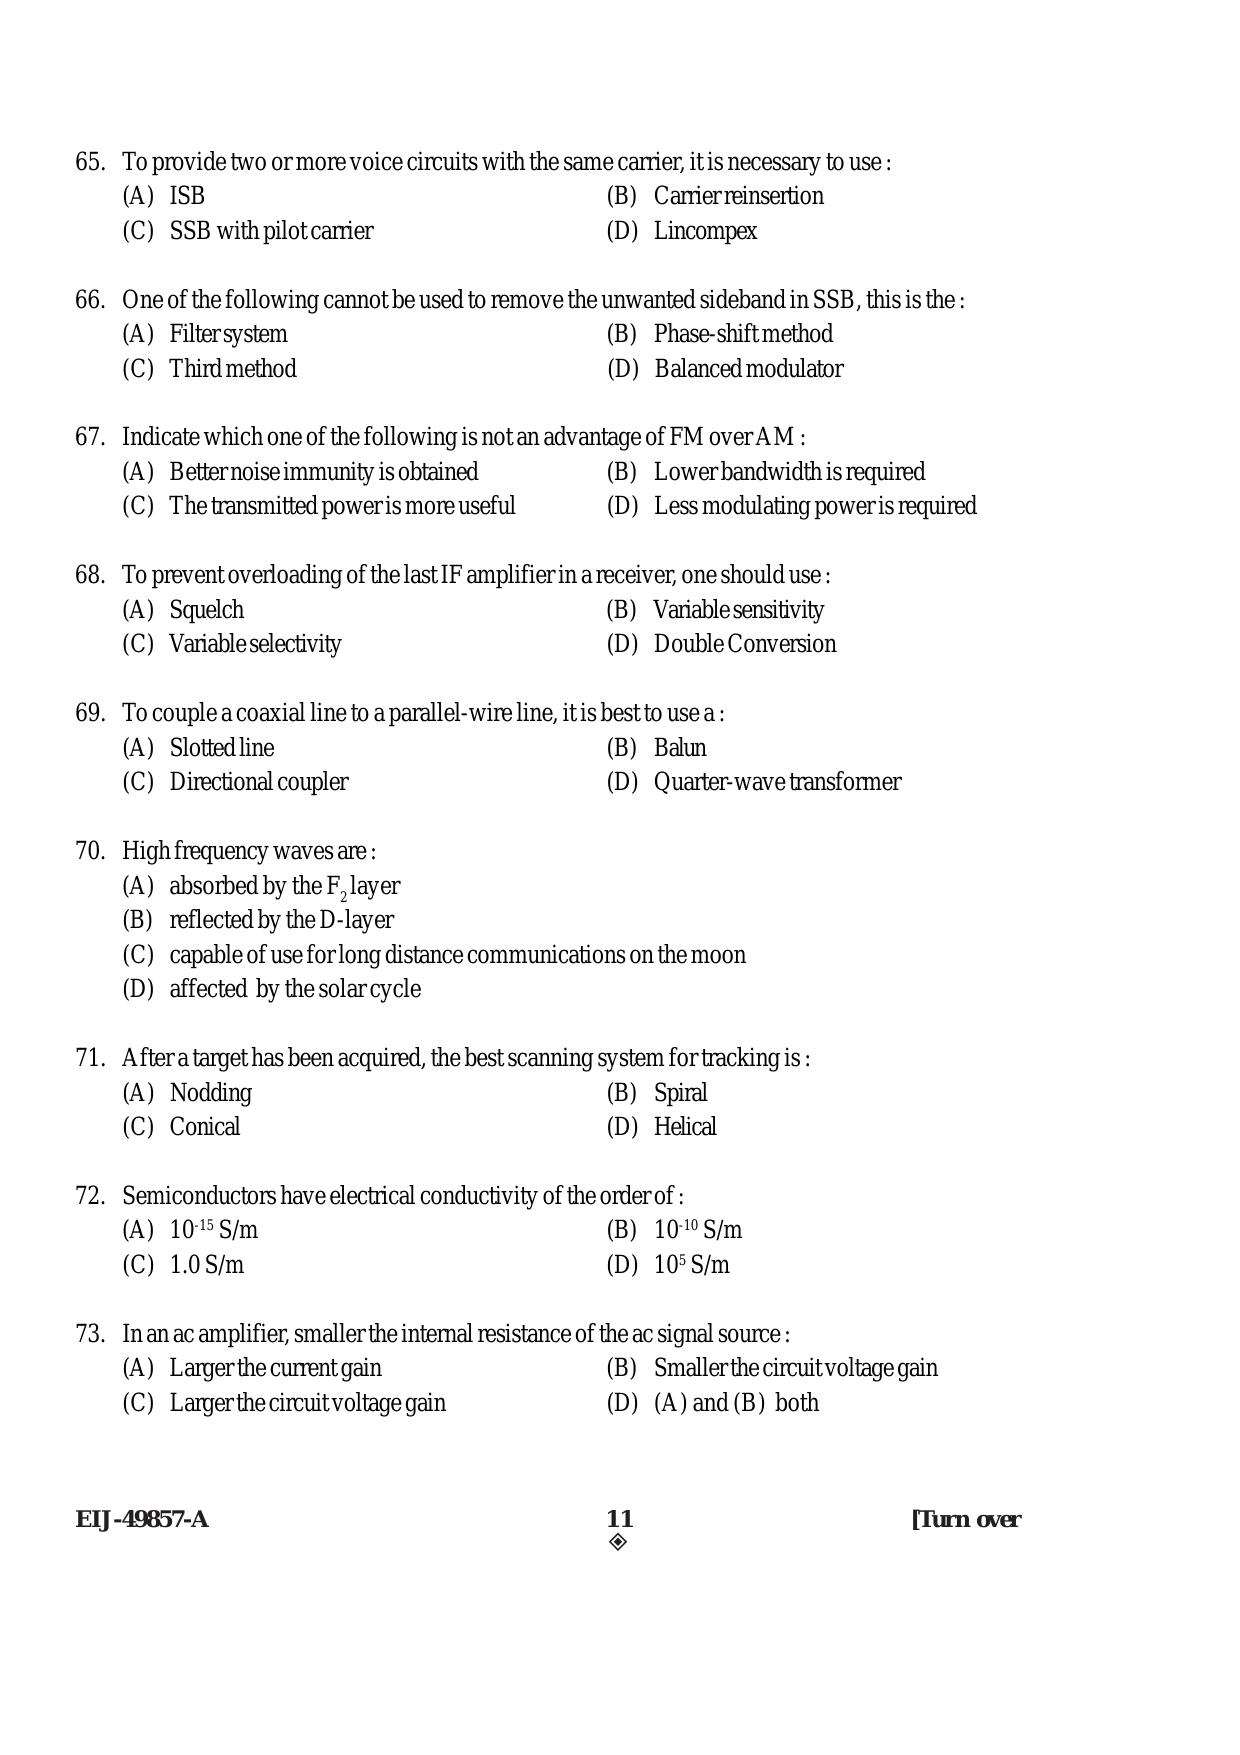 SEBI Officer Electrical Engineering Previous Paper - Page 11